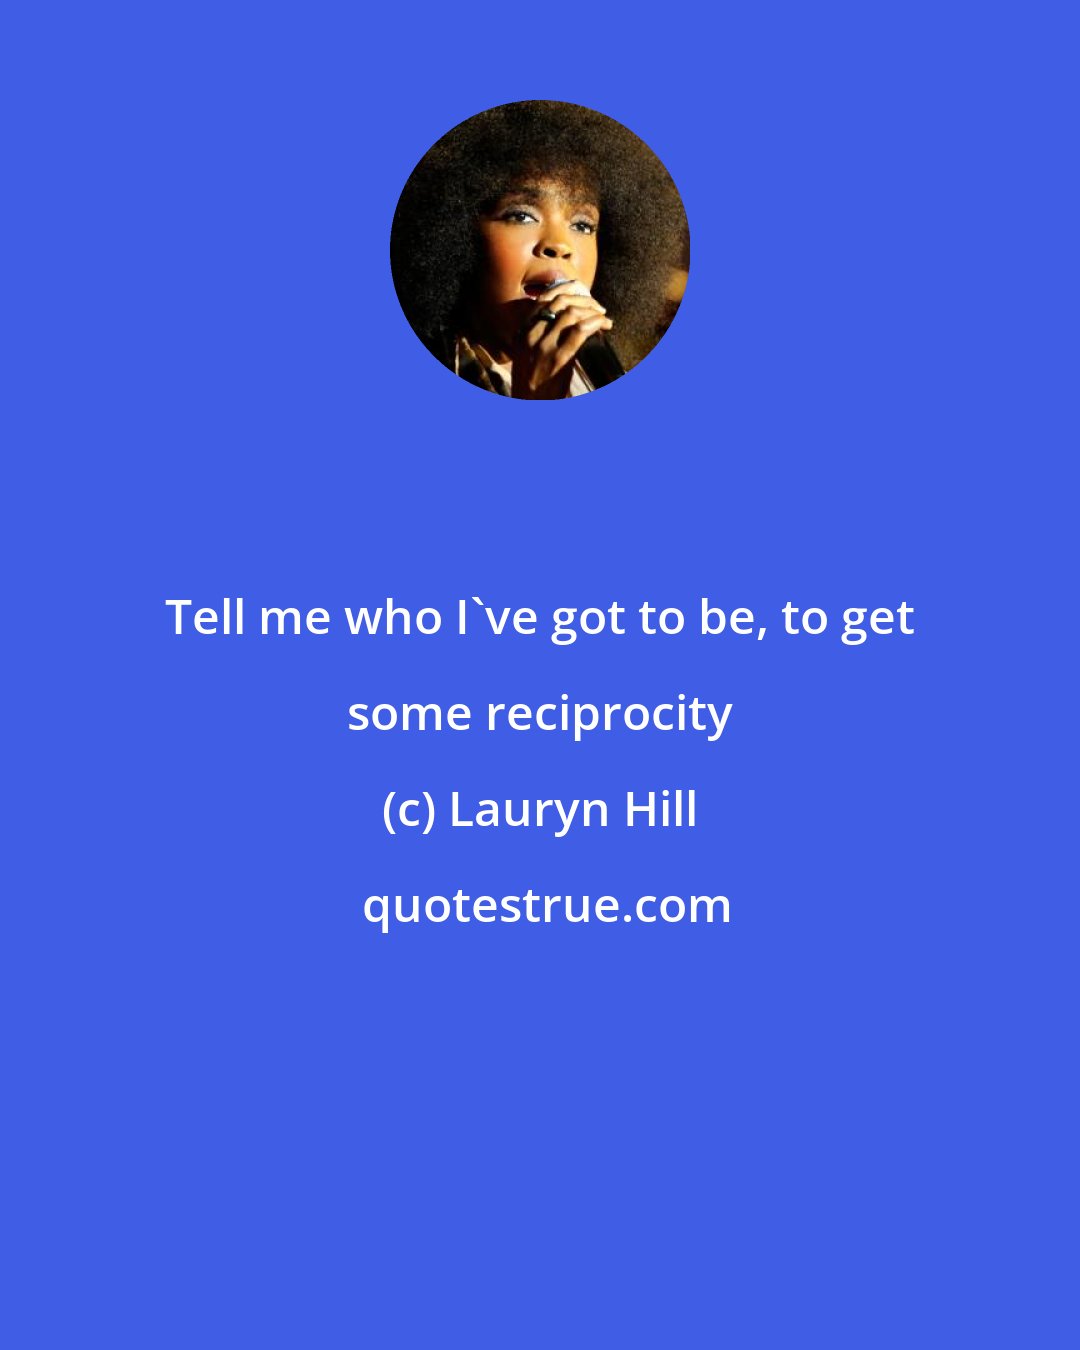 Lauryn Hill: Tell me who I've got to be, to get some reciprocity